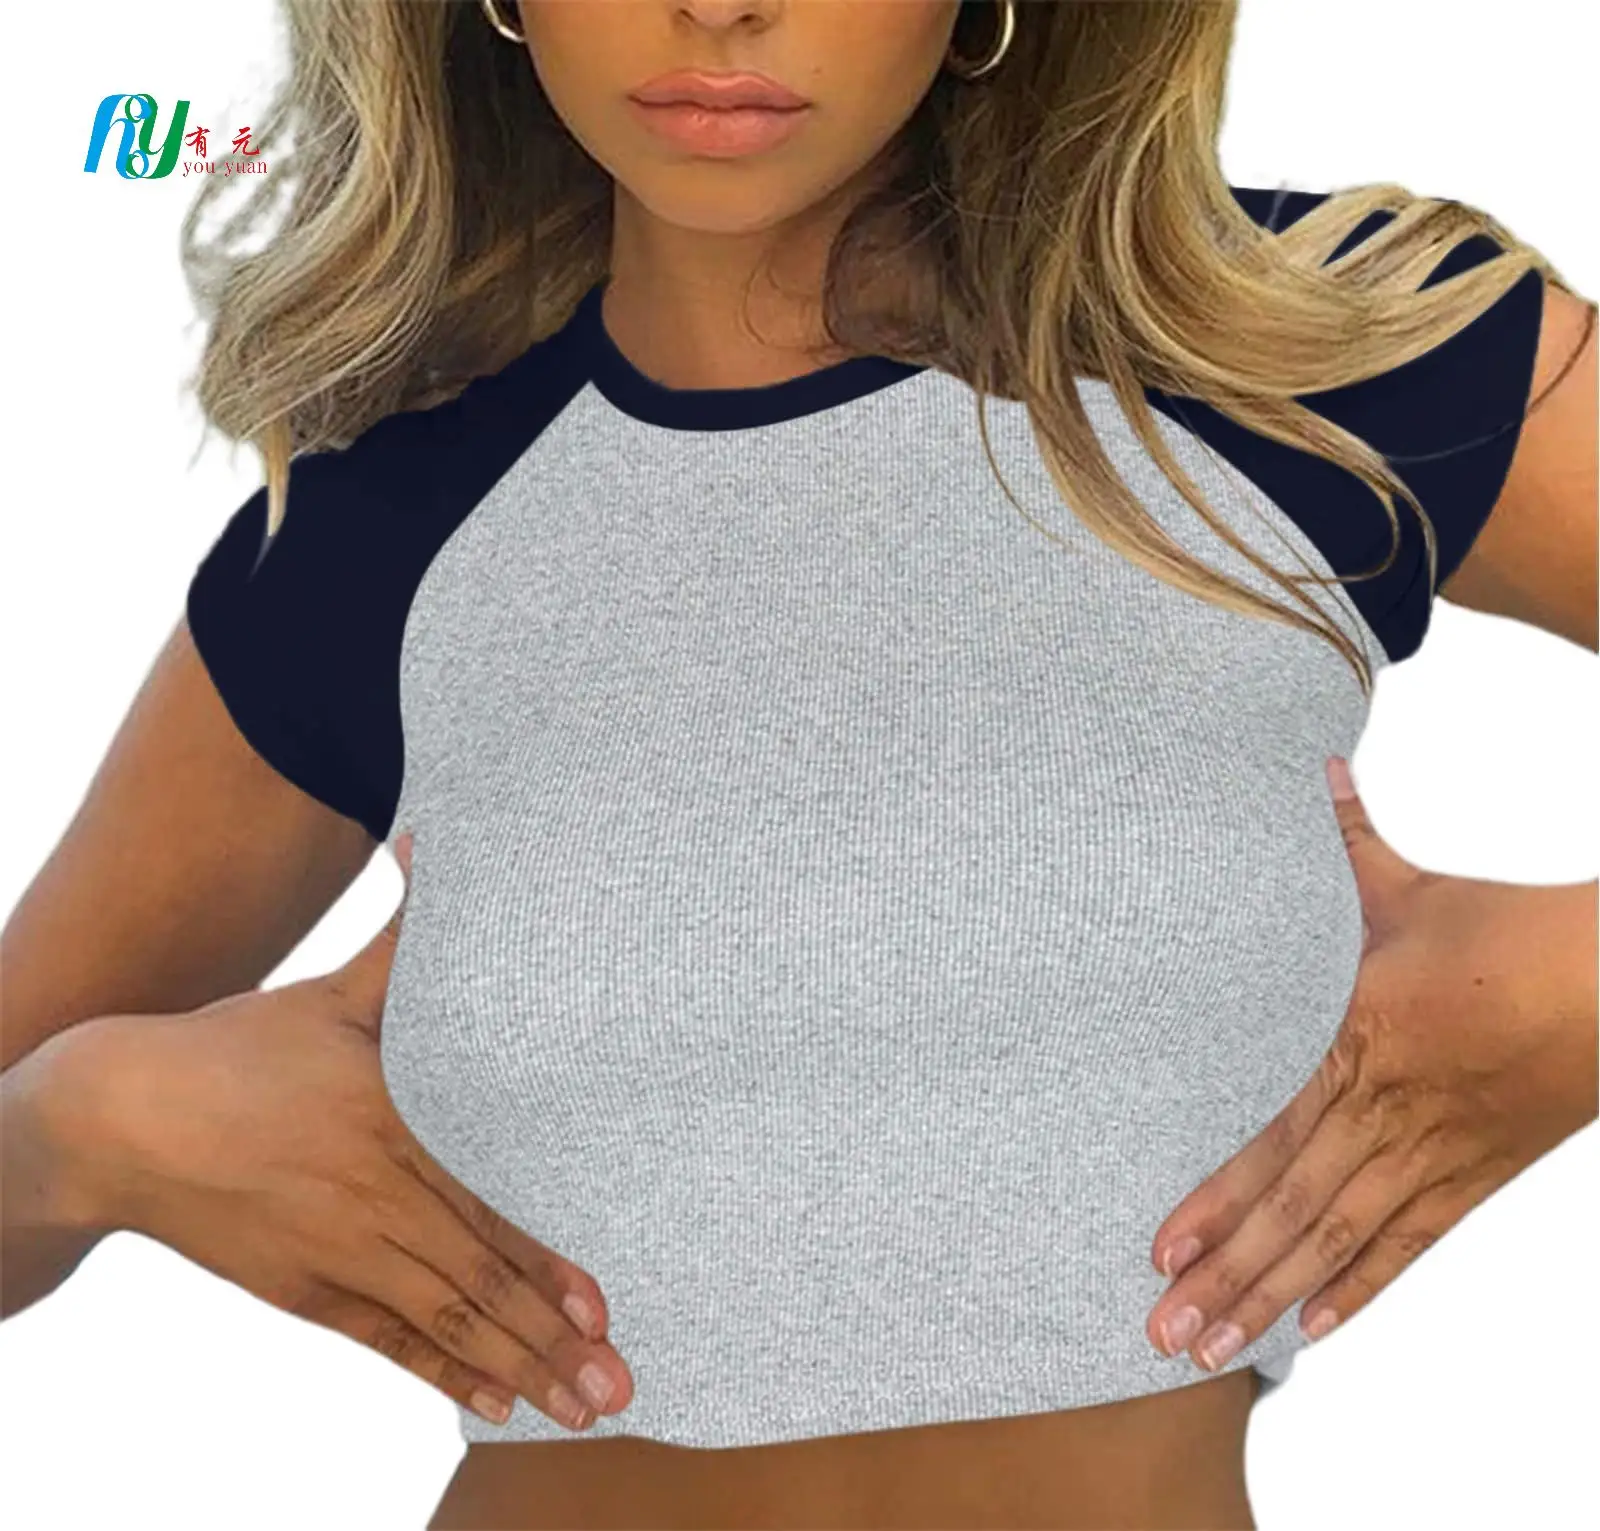 Baby Tee Cropped Ladies Graphic T Shirts Plain Summer Cotton Tight Slim Fit T Shirt Top lady Crop Top Mujer Sexy For Women